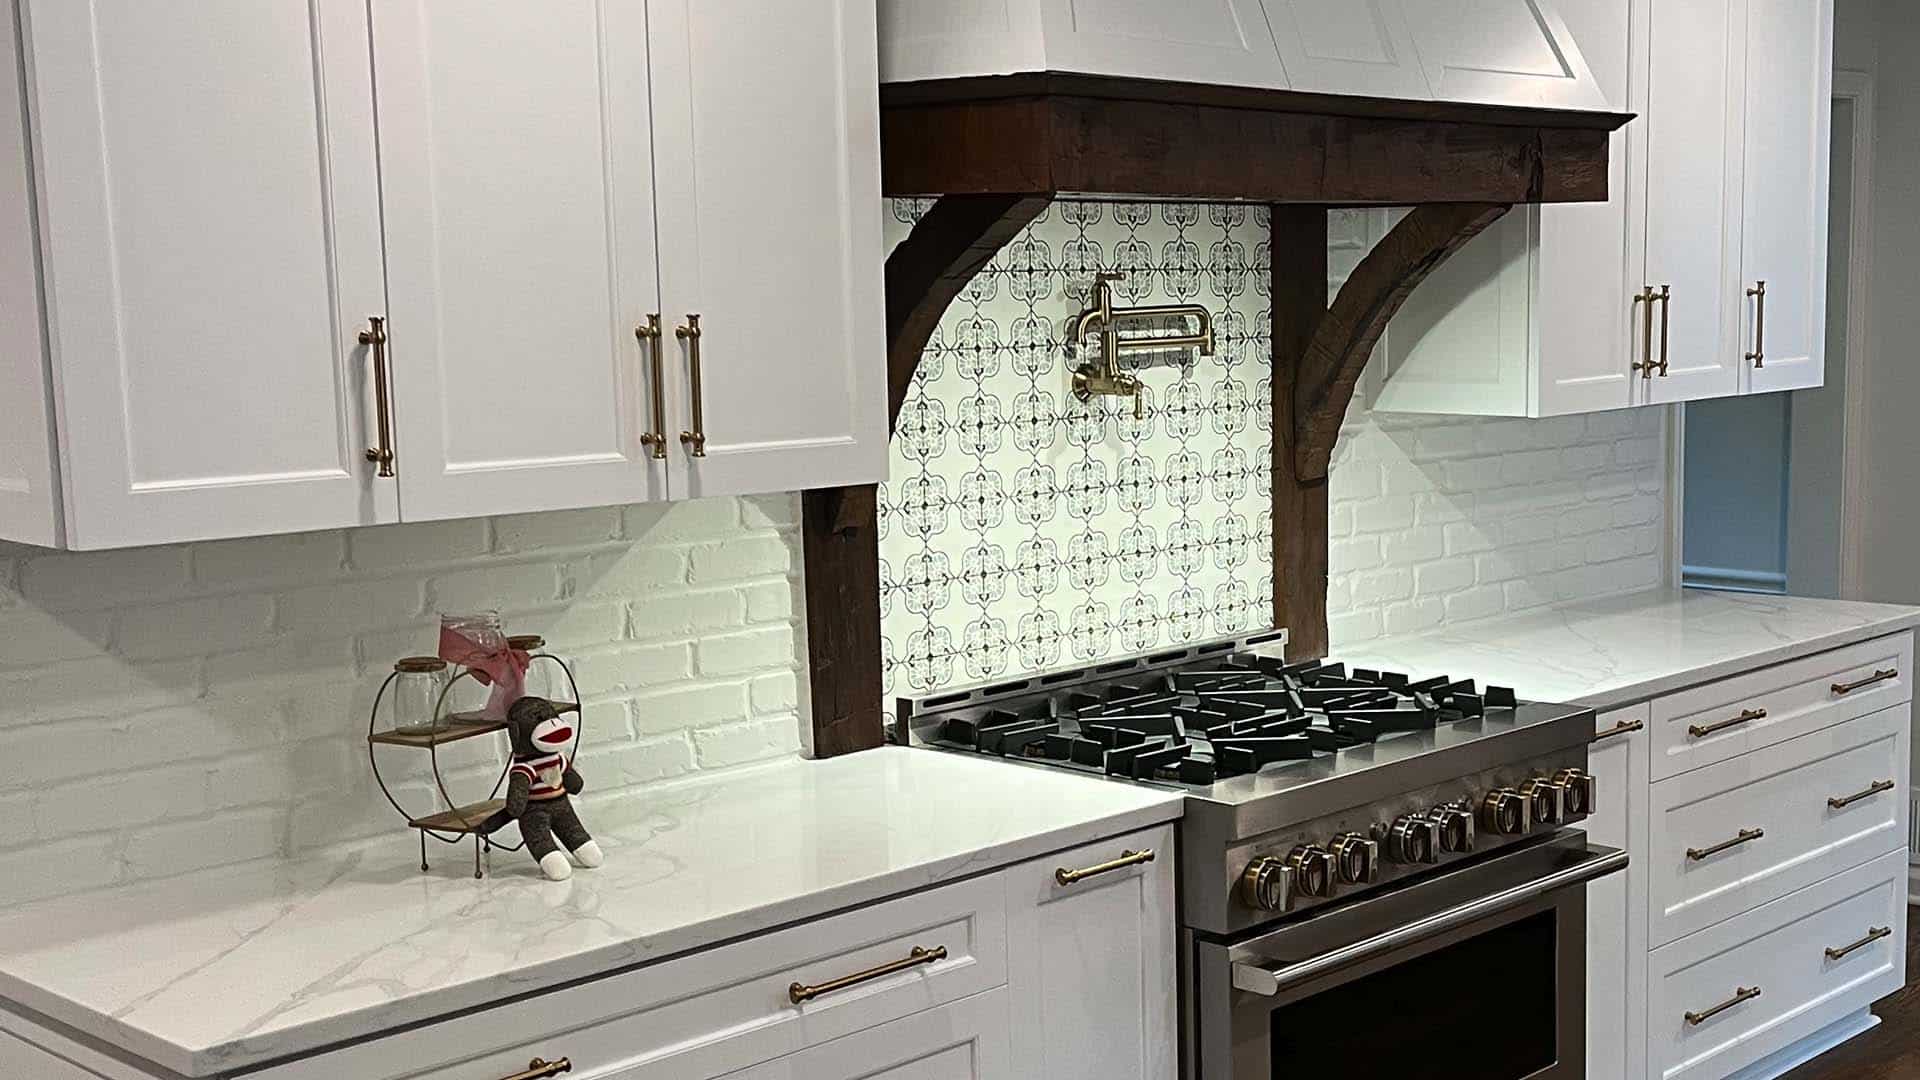 BDM_Residential_Remodeling_1920x1080_Project_Gallery_0008_Kitchen Remodel - Farmhouse Glam Brick Accents 02